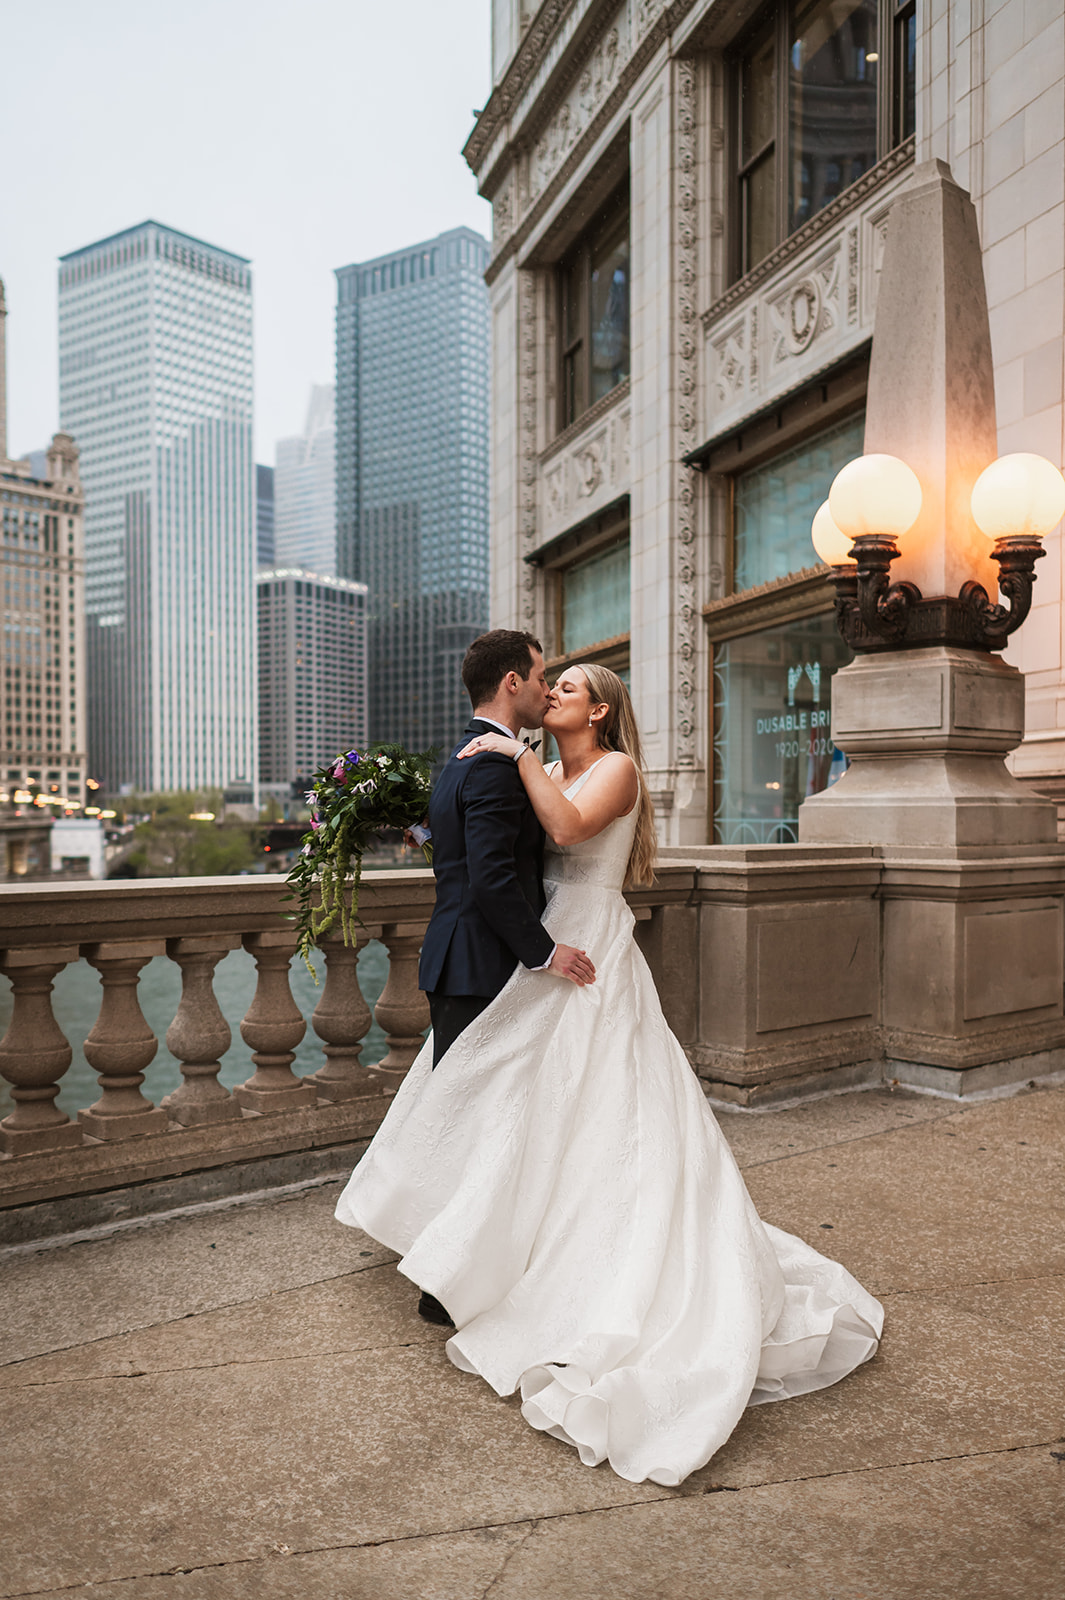 Bride running and jumping on a groom at the end of the winter on riverwalk by the Wrigley building chicago